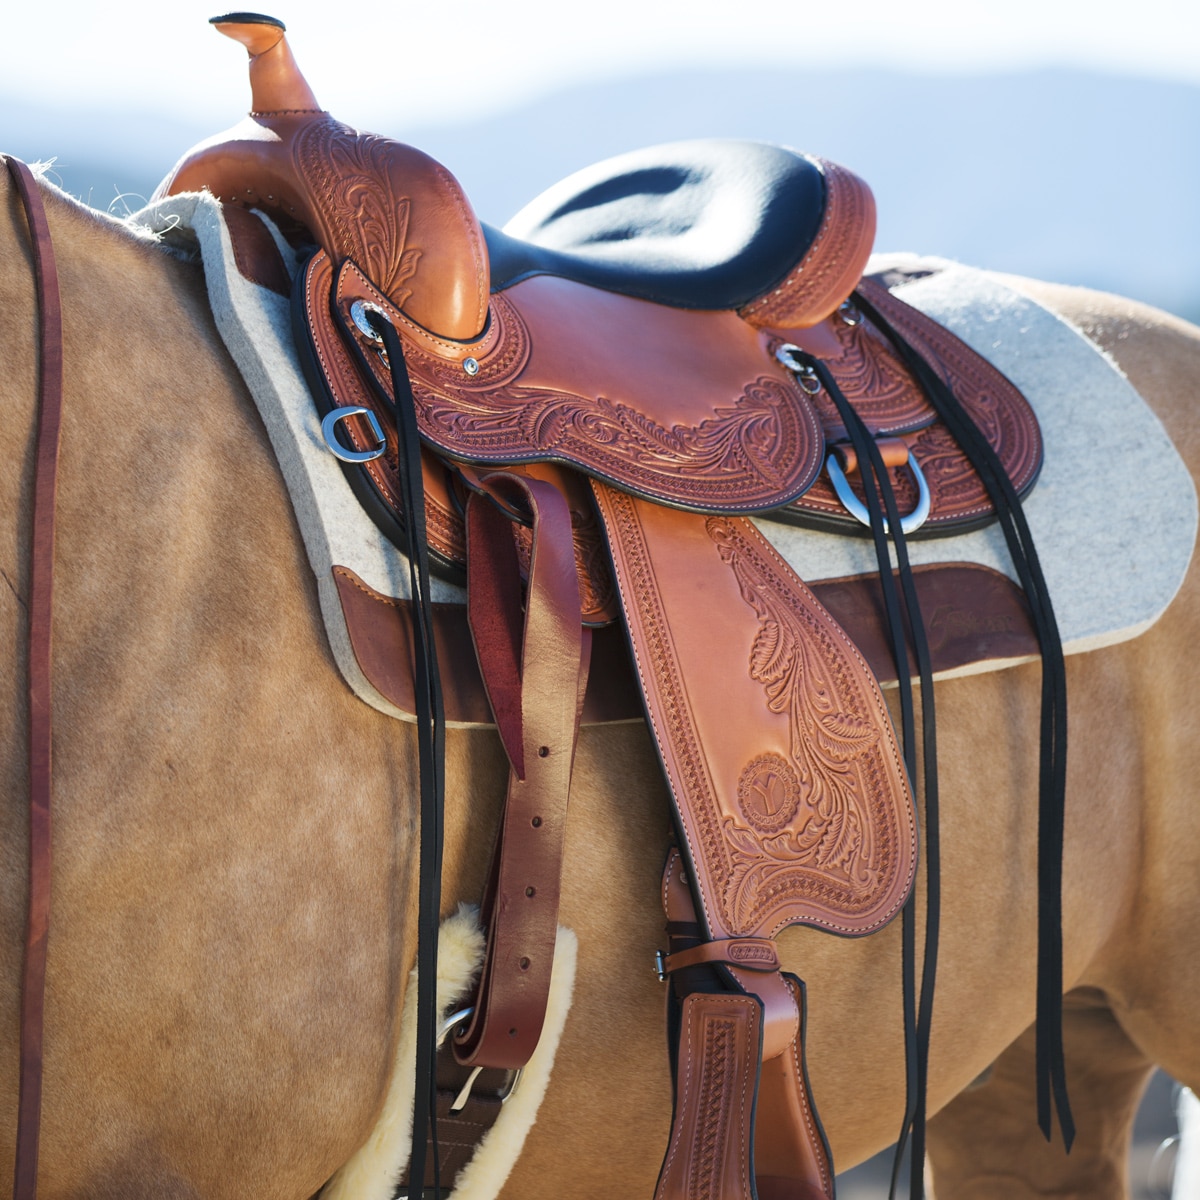 Correctly fitted western saddle on a horse.